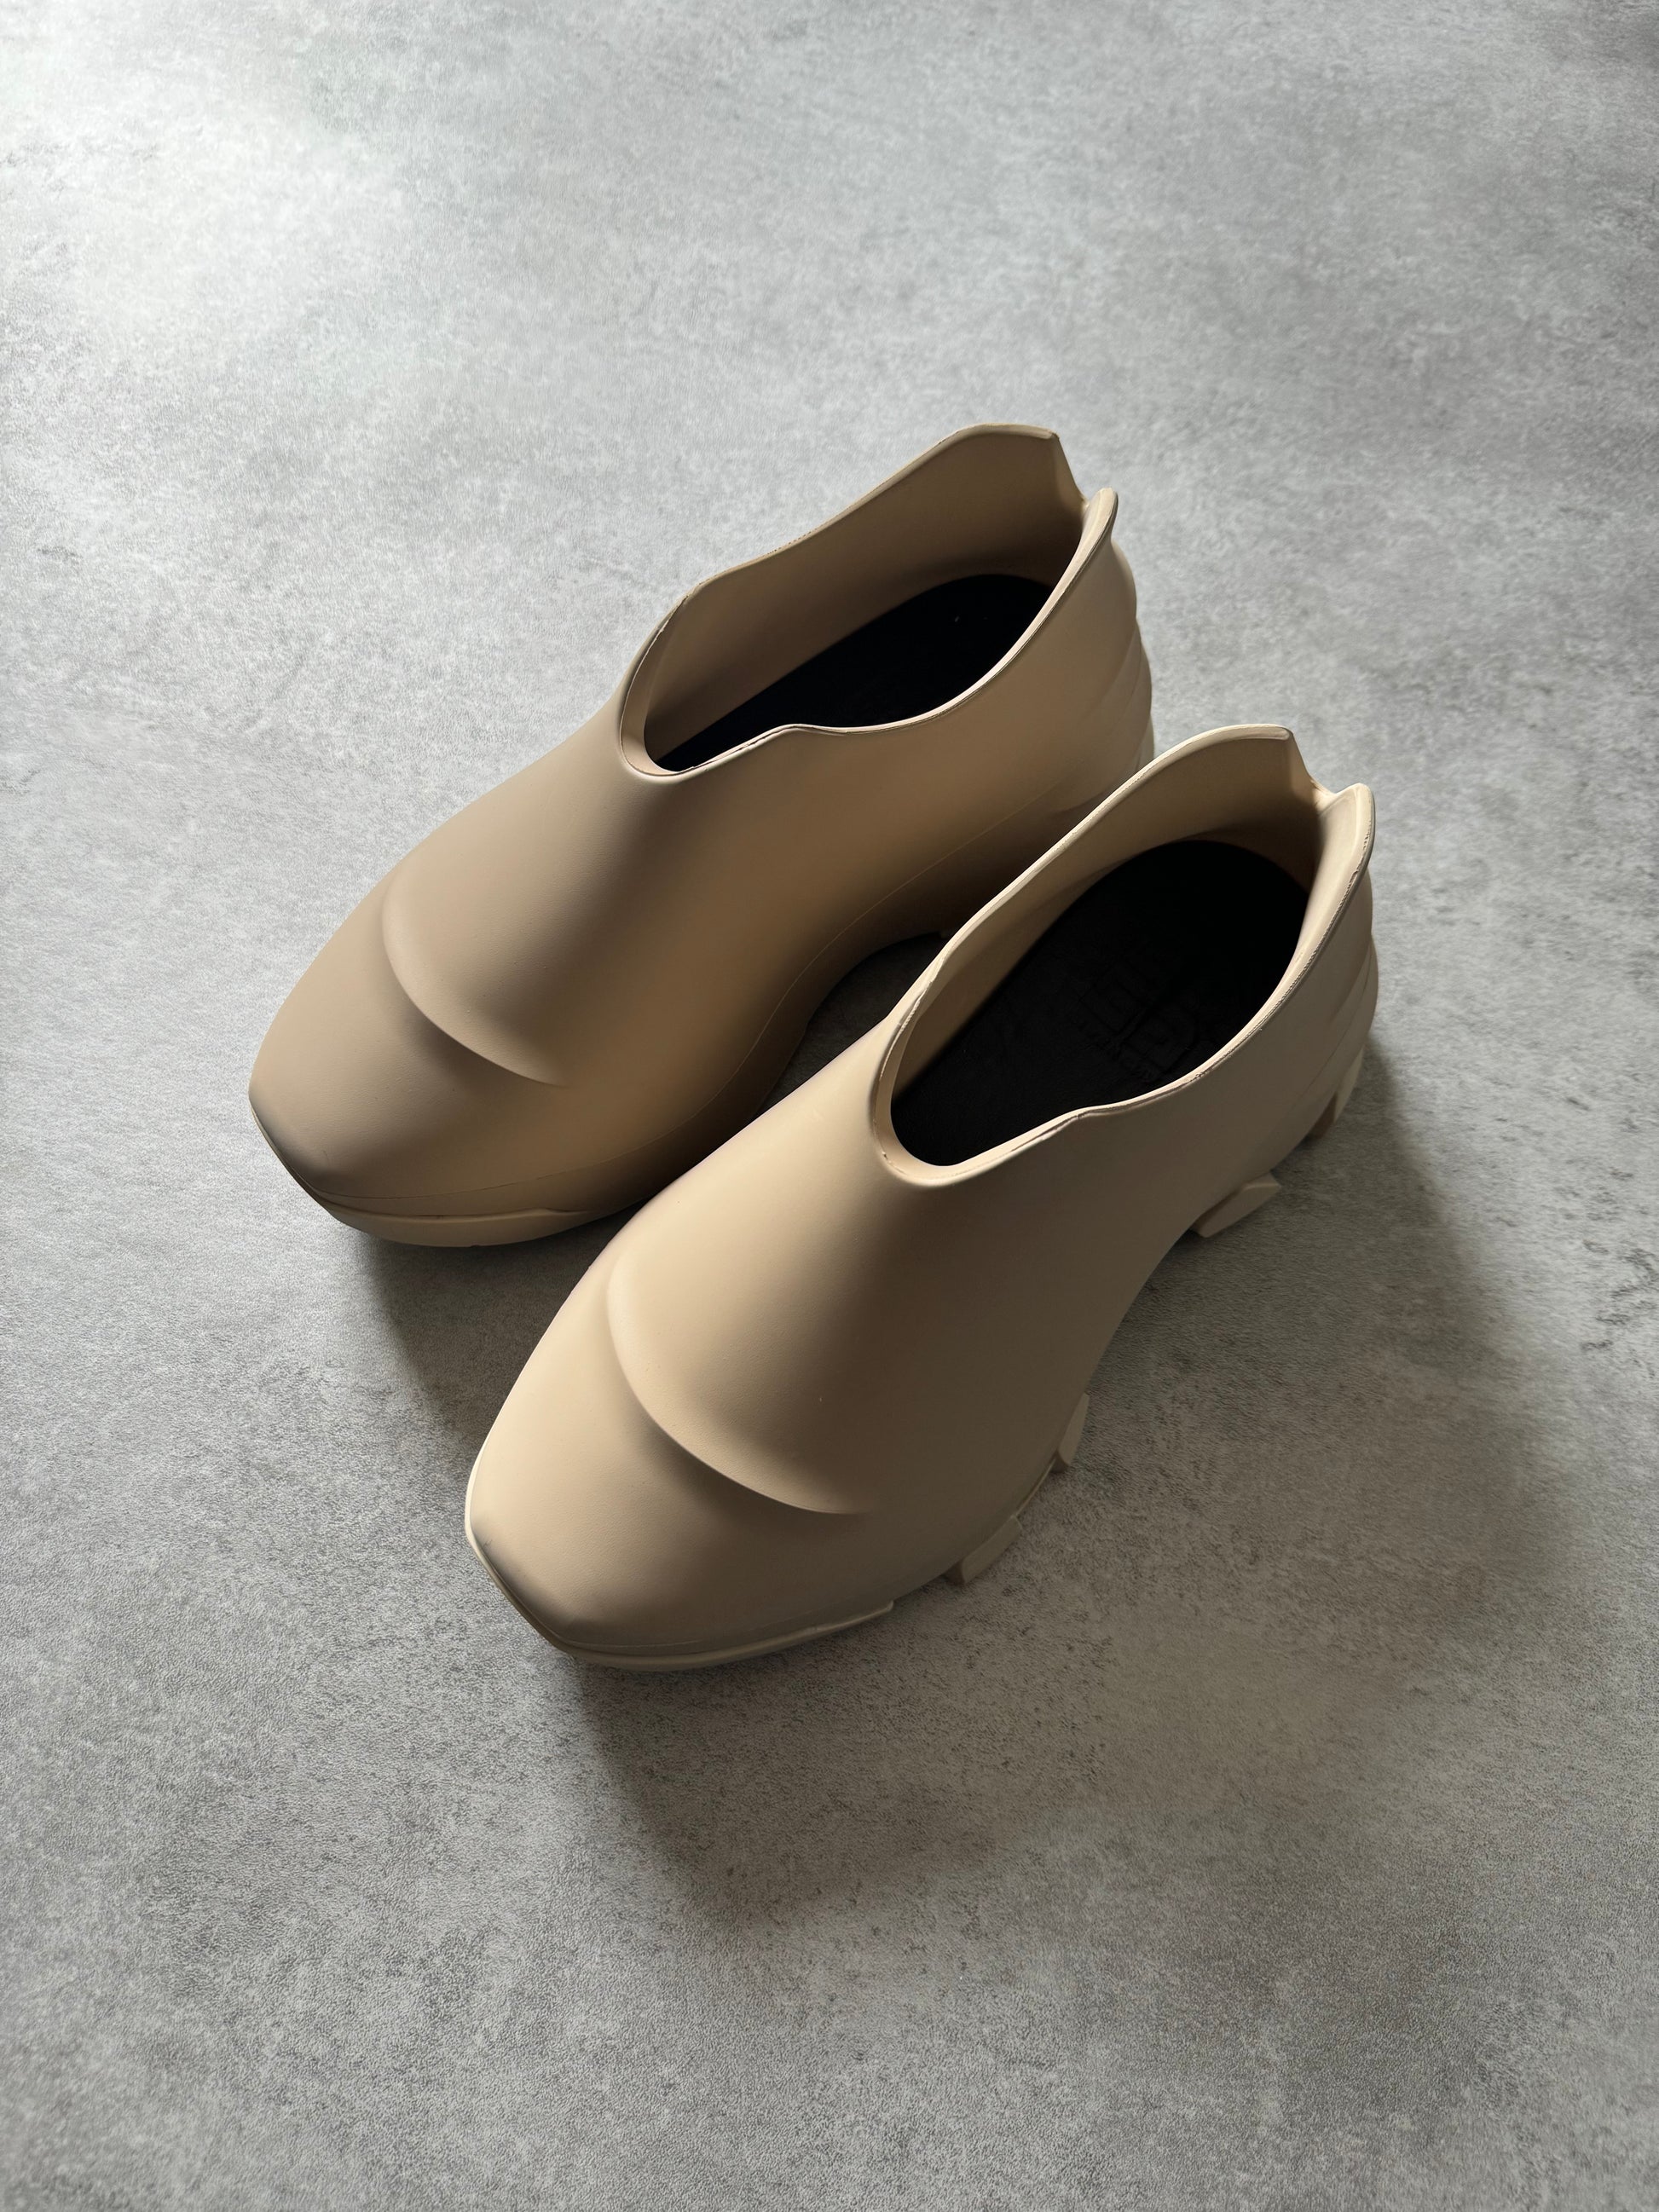 Givenchy Monumental Mallow Beige Shoes (41) - 5